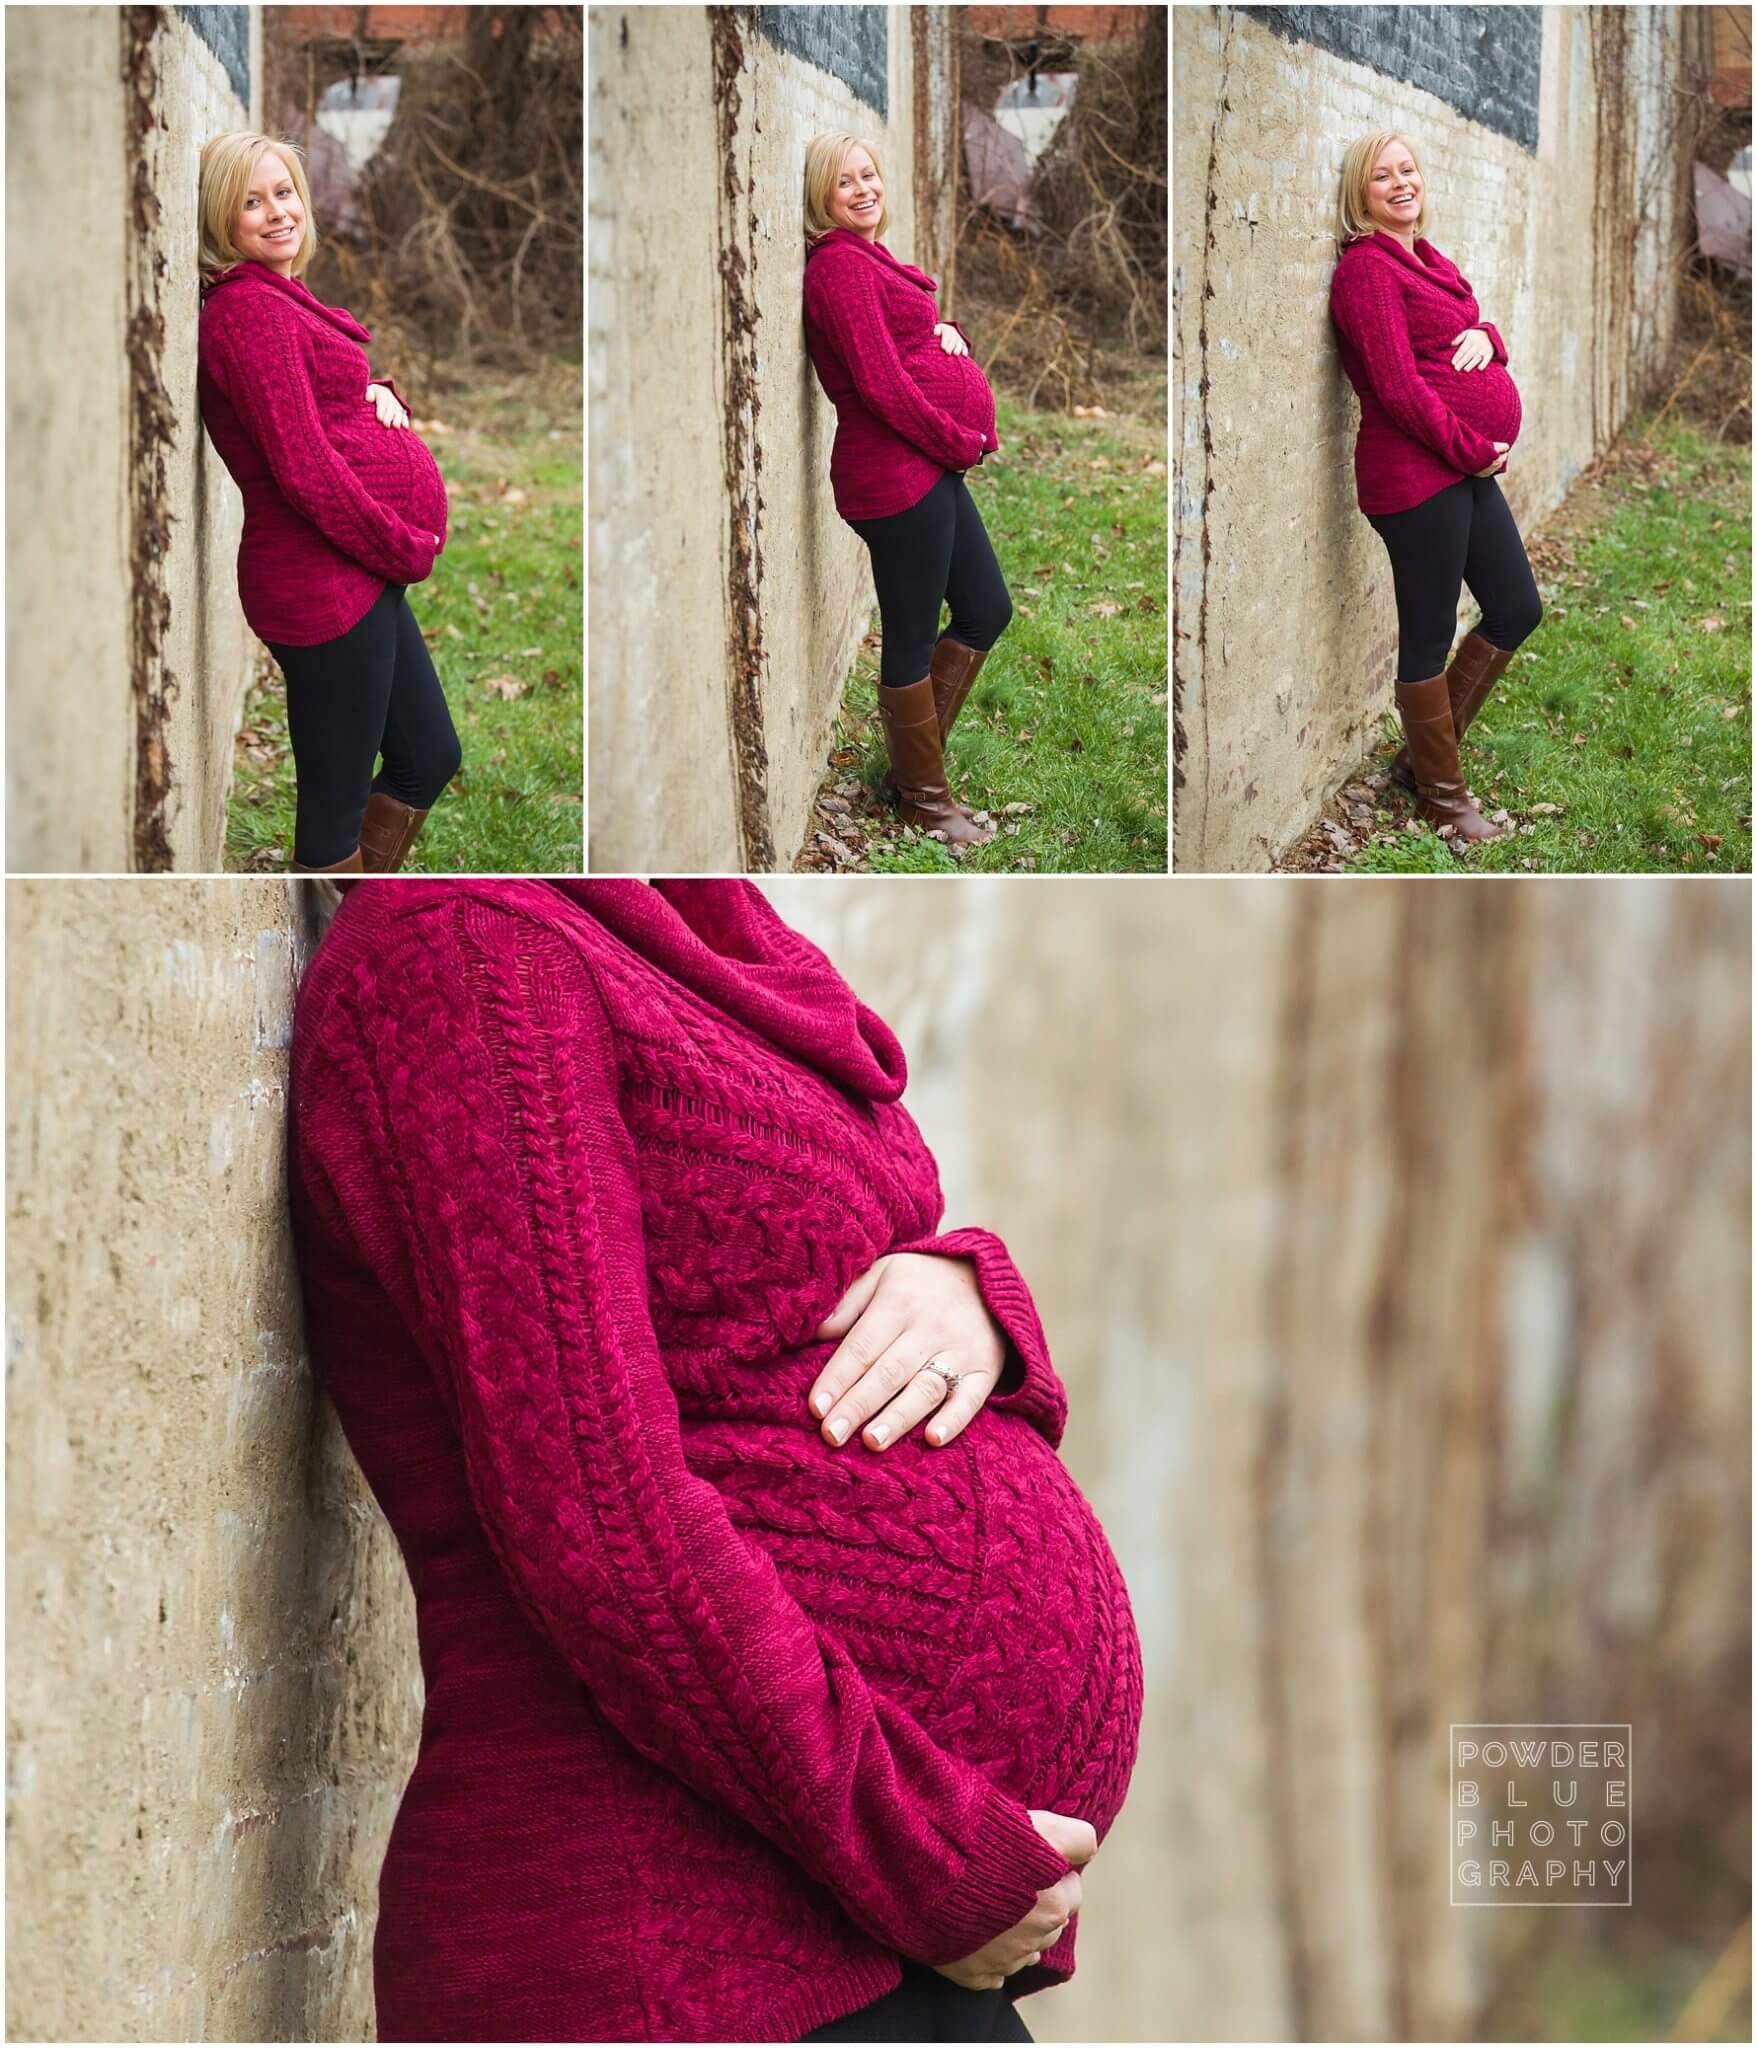 twin pregnancy maternity session images. pittsburgh maternity photographer powder blue photography.